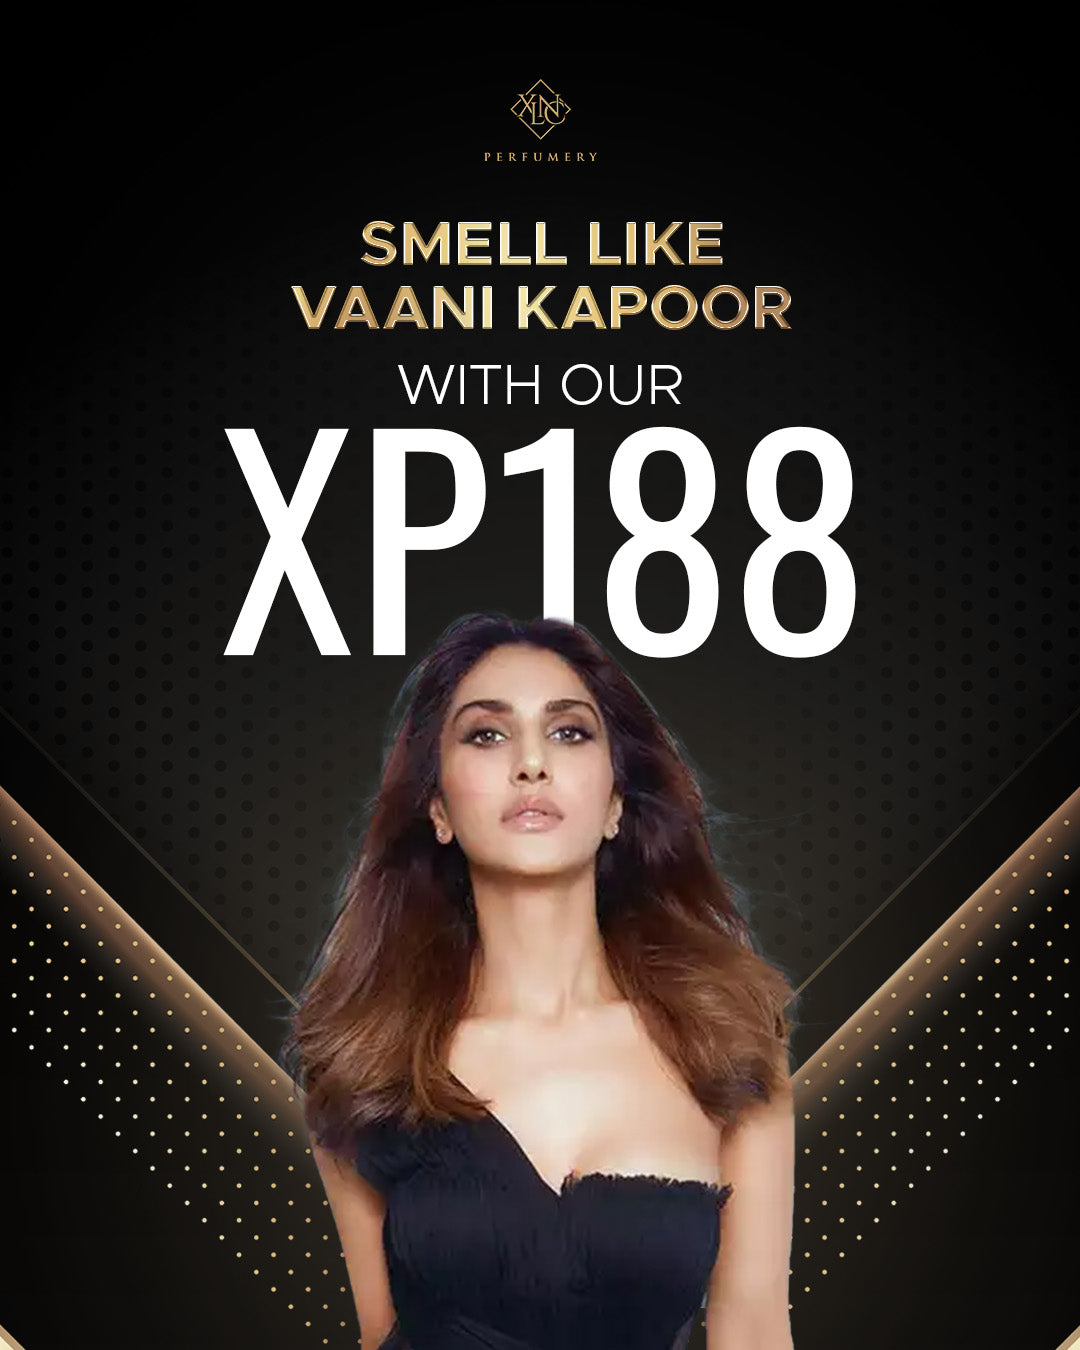 XP188 (Inspired By Arm@ni SI) Worn by Vaani Kapoor